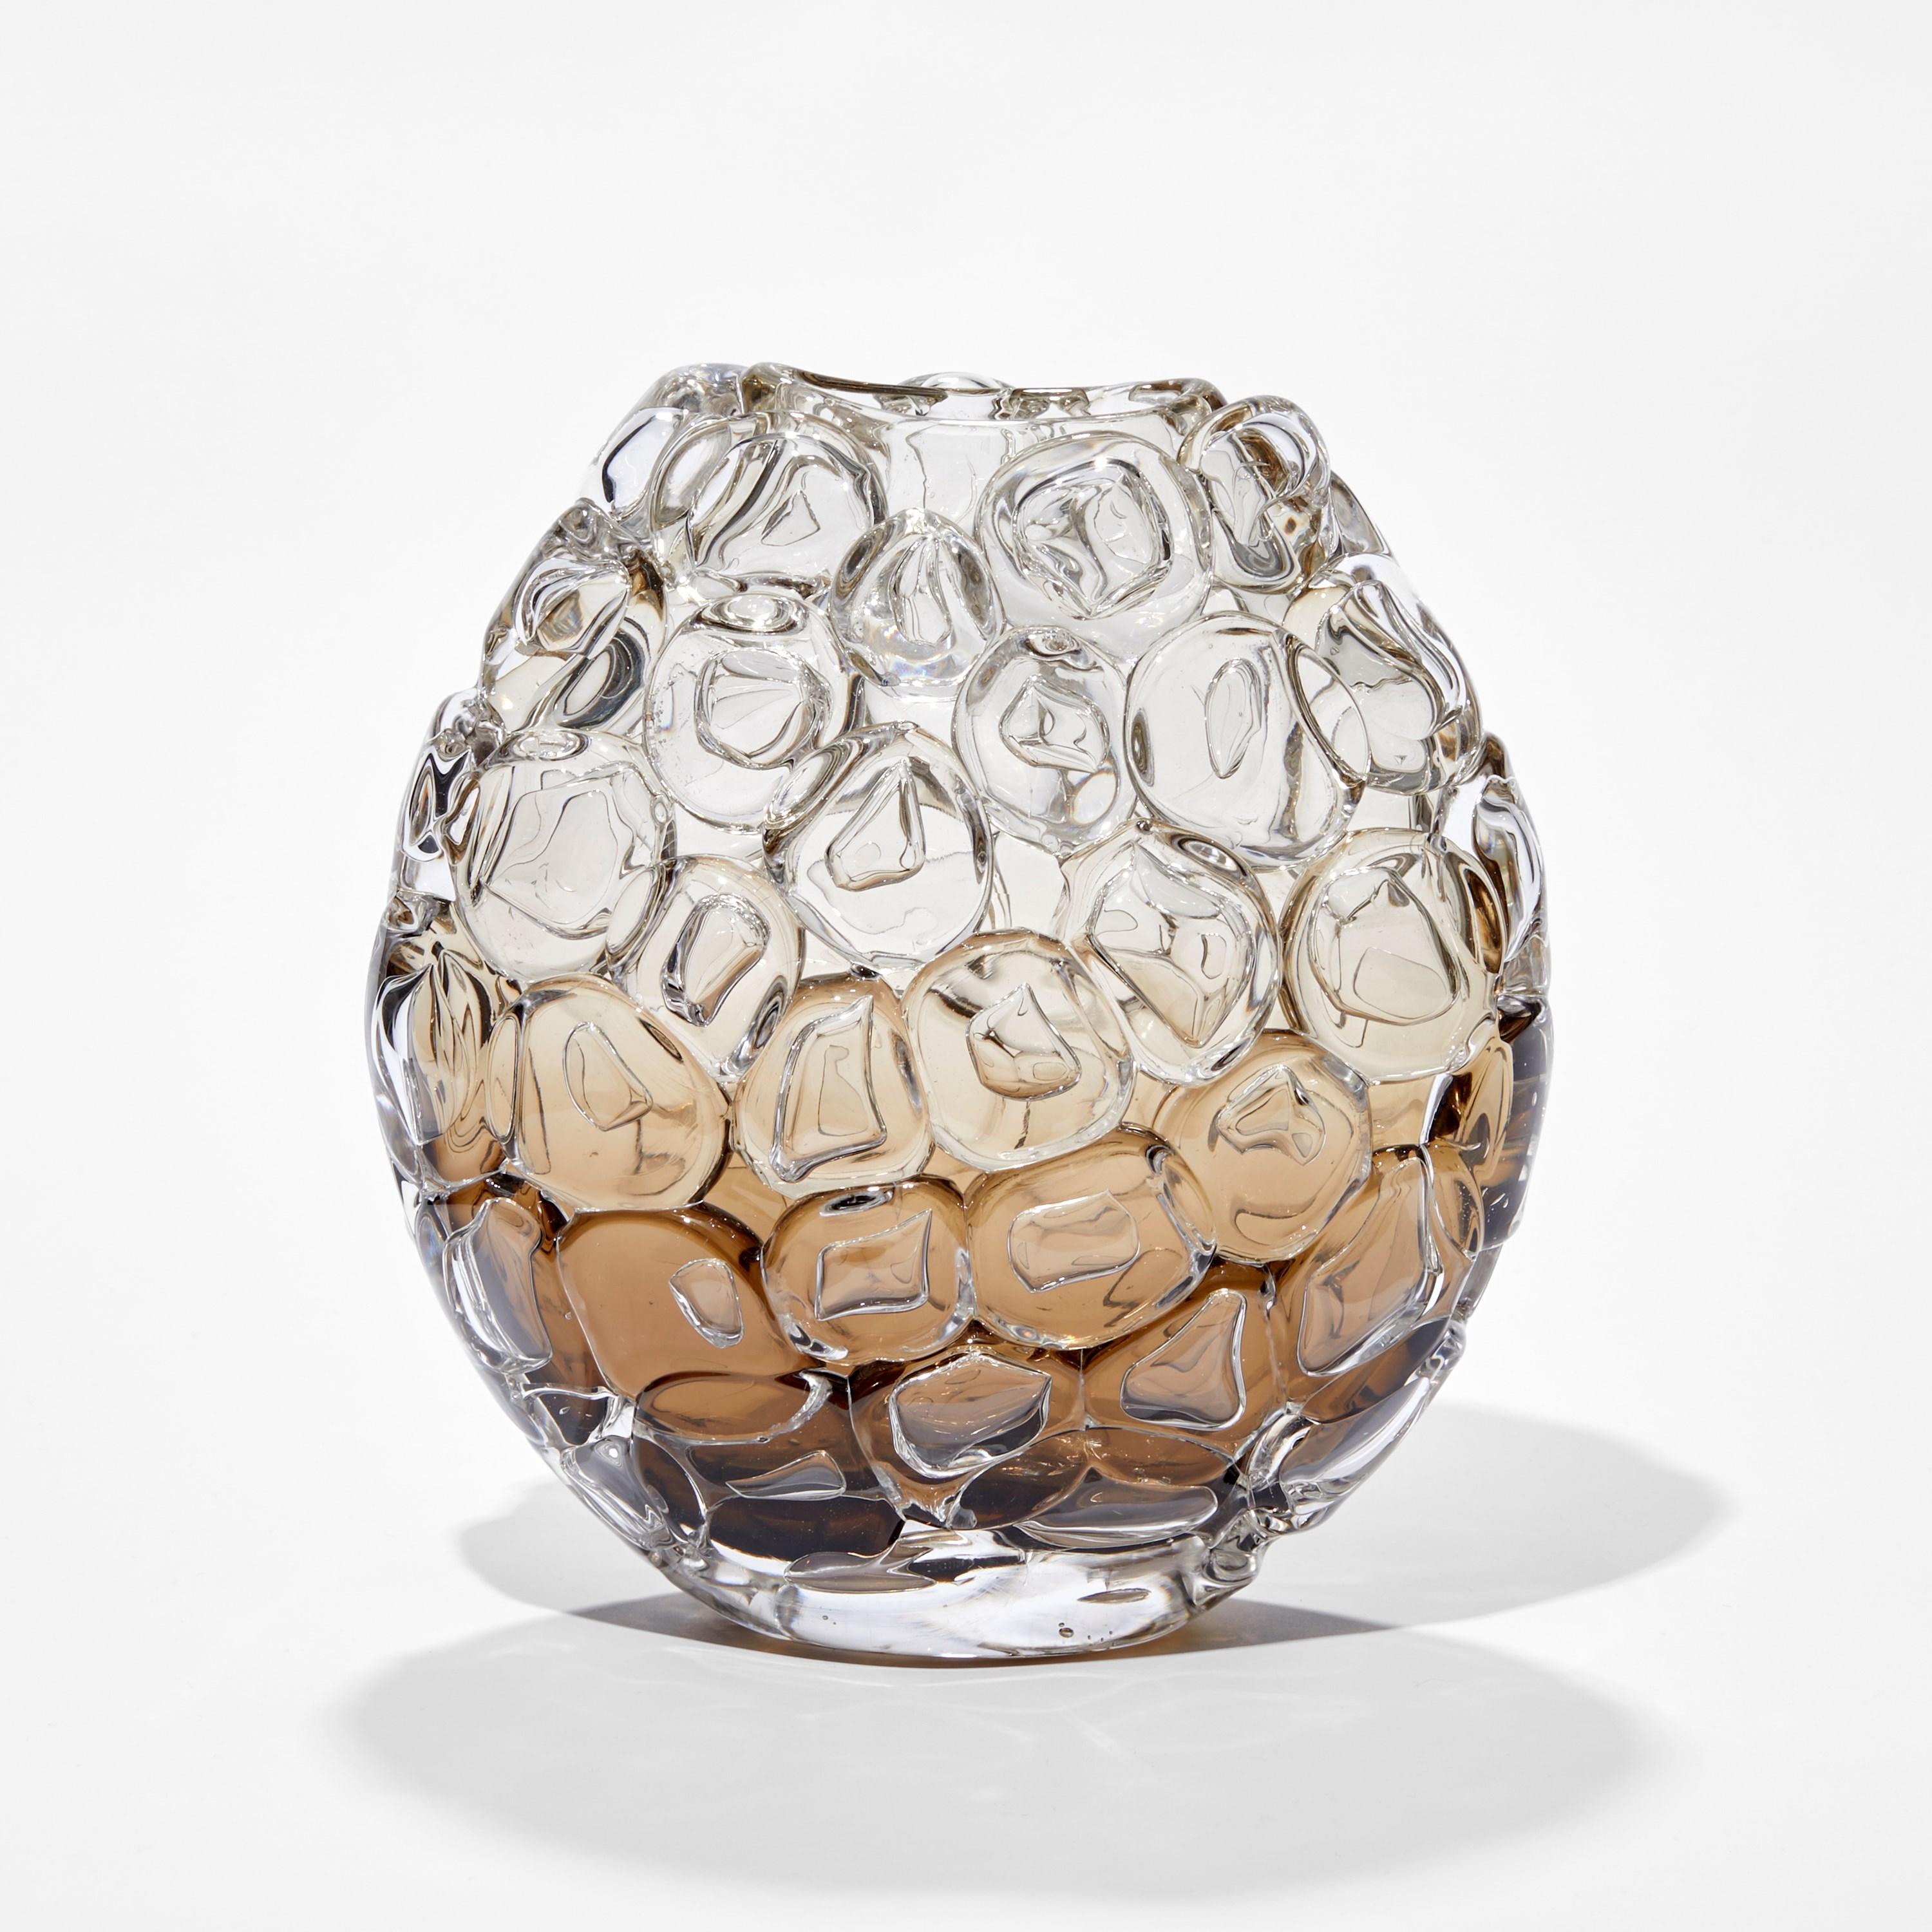 'Bubblewrap in Olivin Ombre I' is a handblown and sculpted vase created from glass by the British artist, Allister Malcolm.

Playful yet elegant, Malcolm has formed oversized bubbles on the exterior of this handcrafted and blown piece. The title